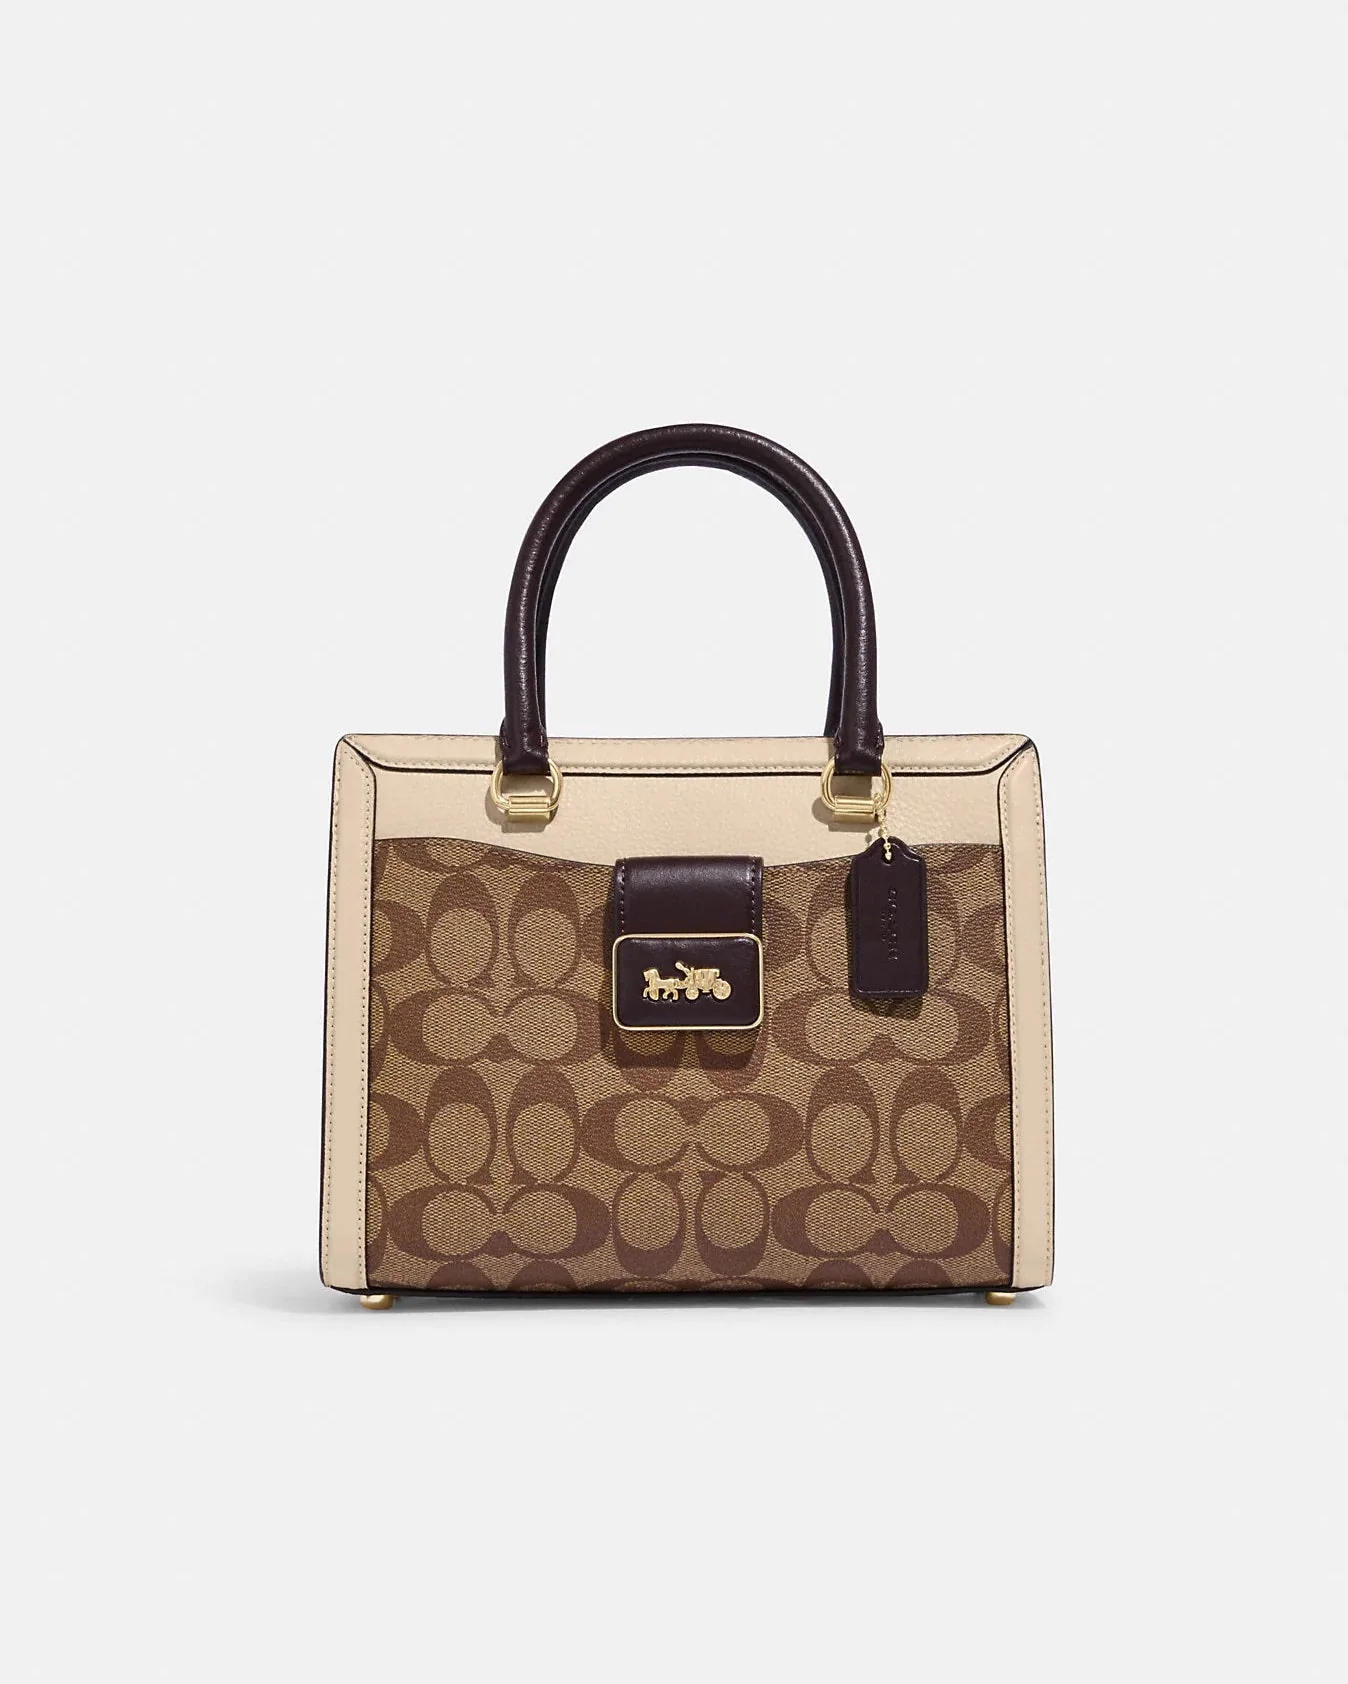 Coach Grace Carryall In Signature Canvas